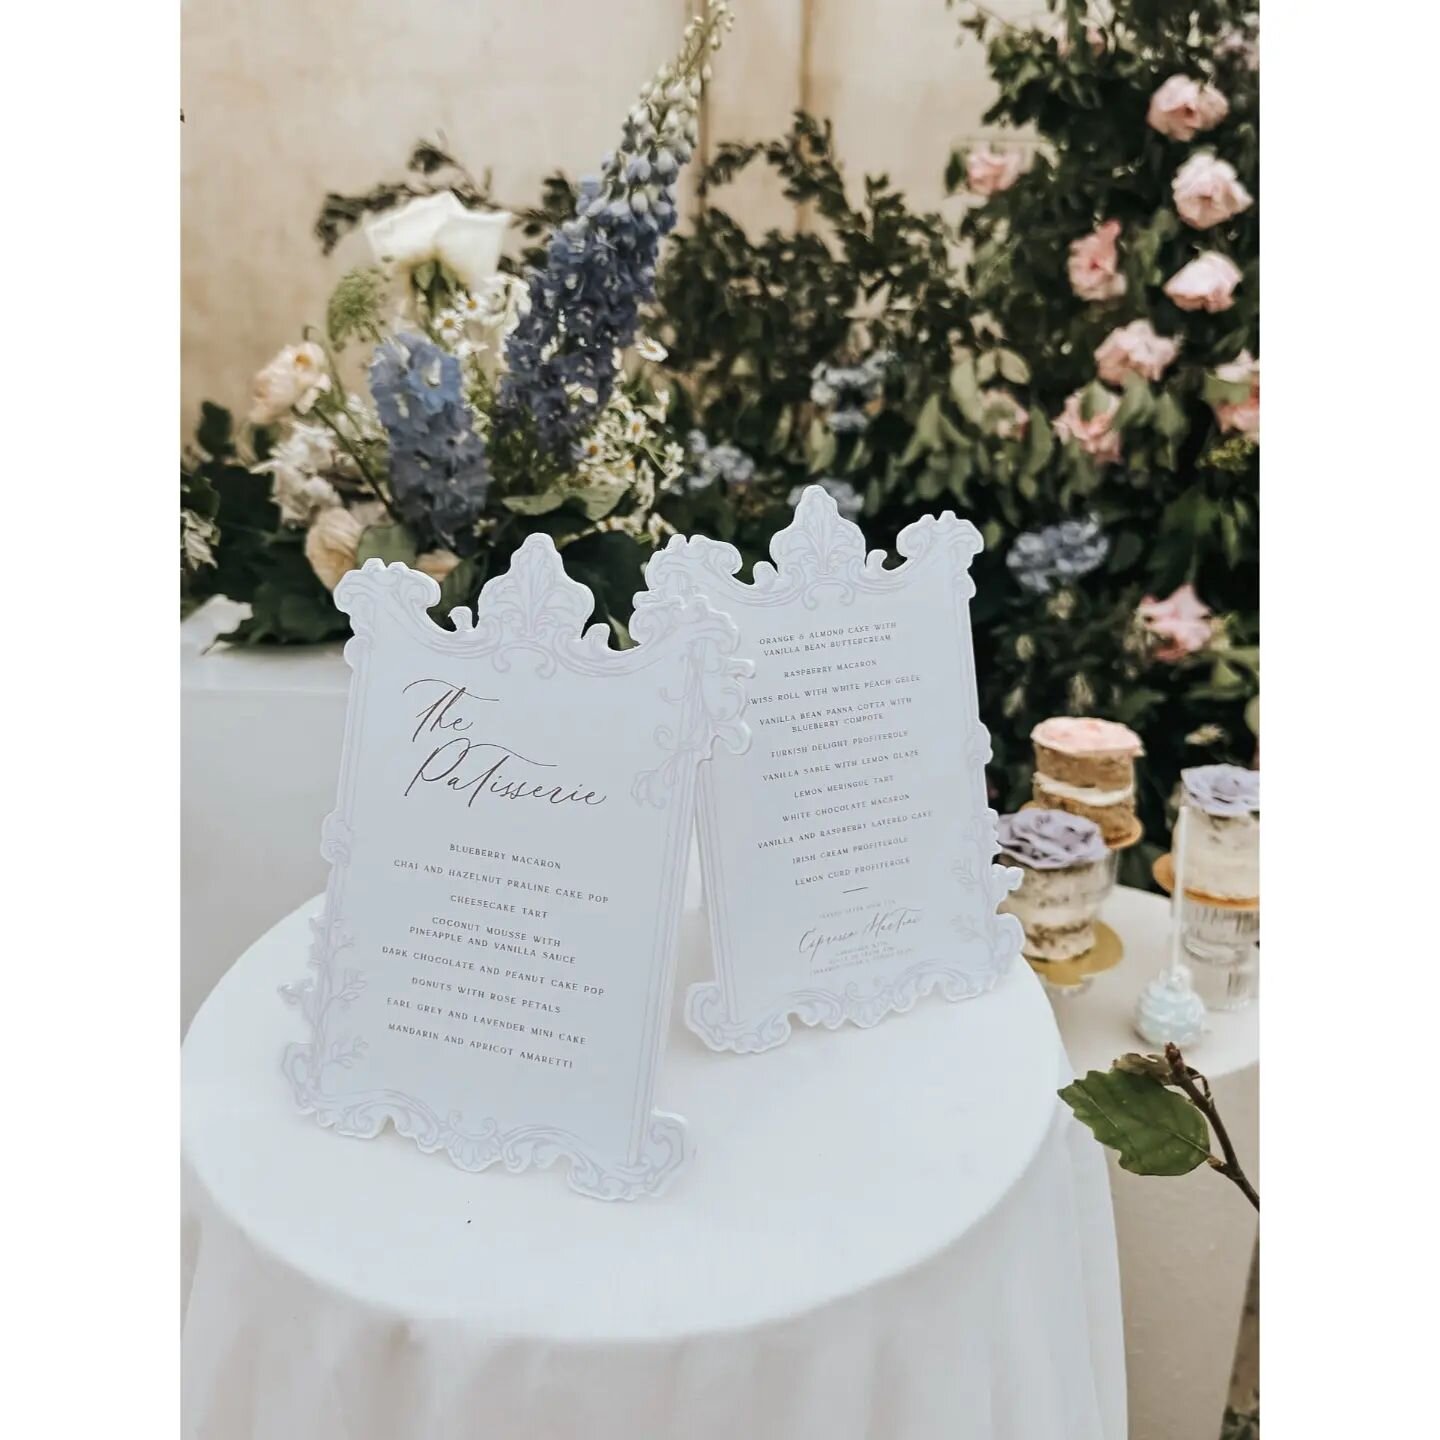 Dreamy High Tea and French Vibes yesterday for Lauren &amp; JP.
Created by the always talented @ivyandbleuevents at @deuxbelettes with the most stunning sweets by @marinamachadocakes
.
#smallbusiness #littlegreenleaf #littlegreenleafstationery #simpl